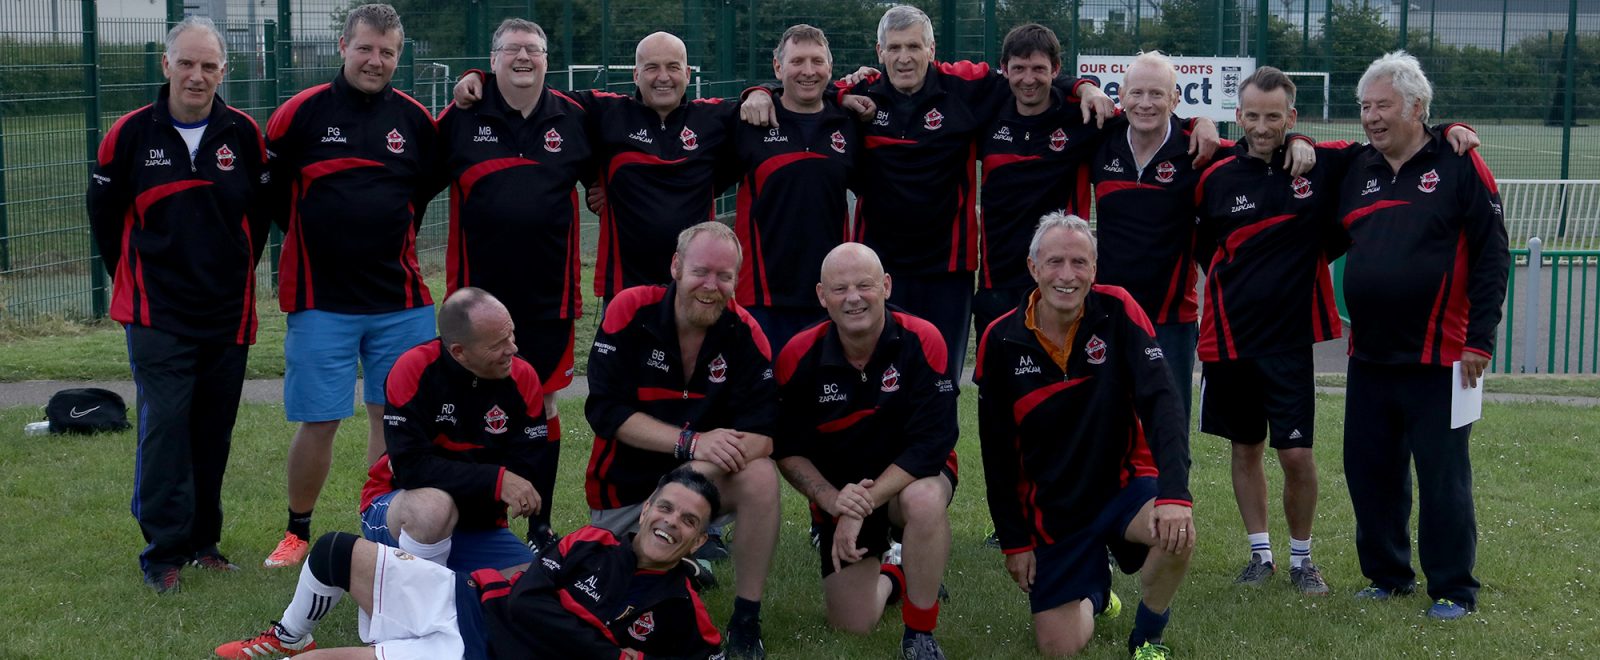 Walking football team on the event day